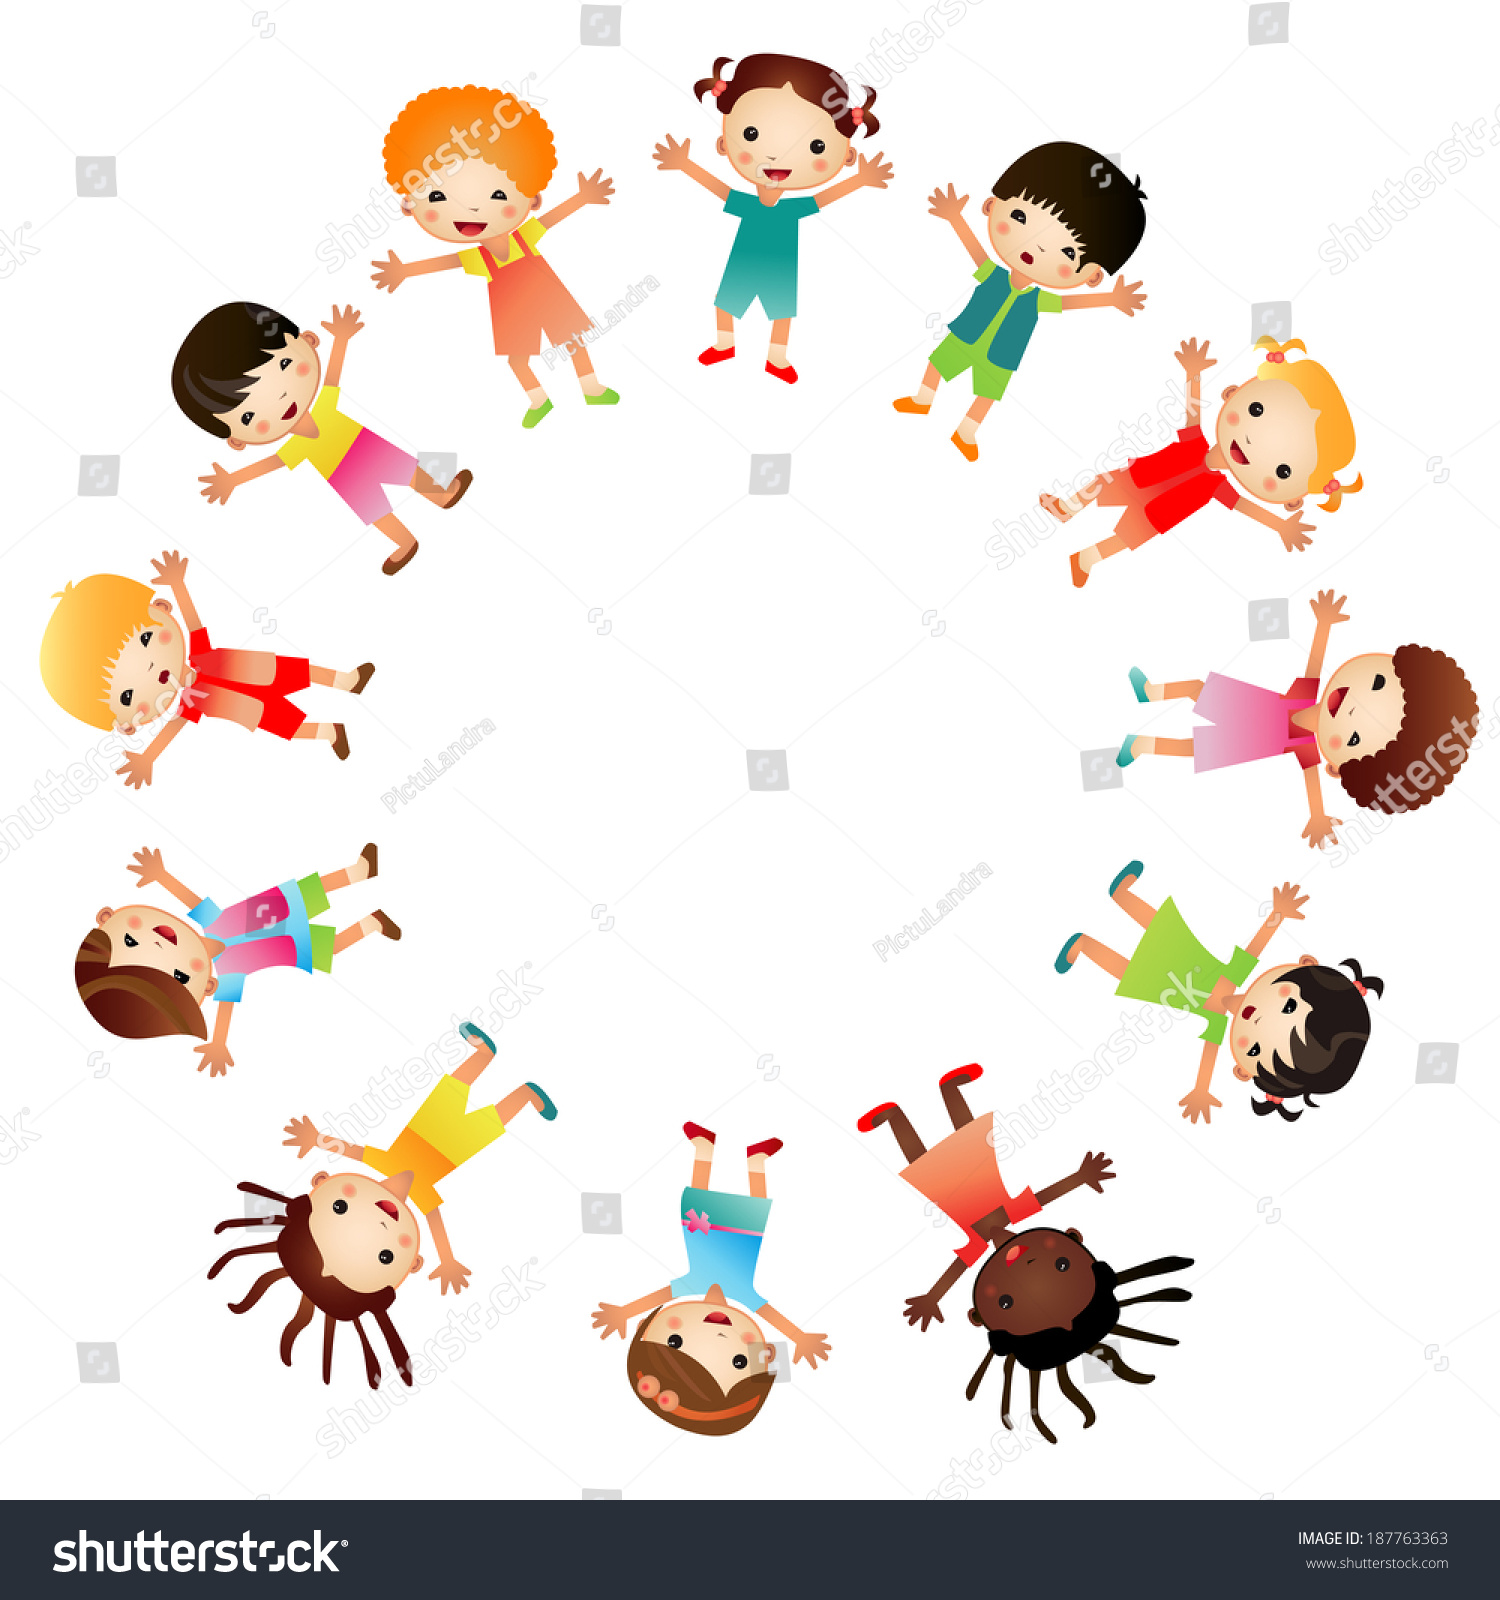 Group Of Children. Kids Collection Isolated On White. Multicultural ...